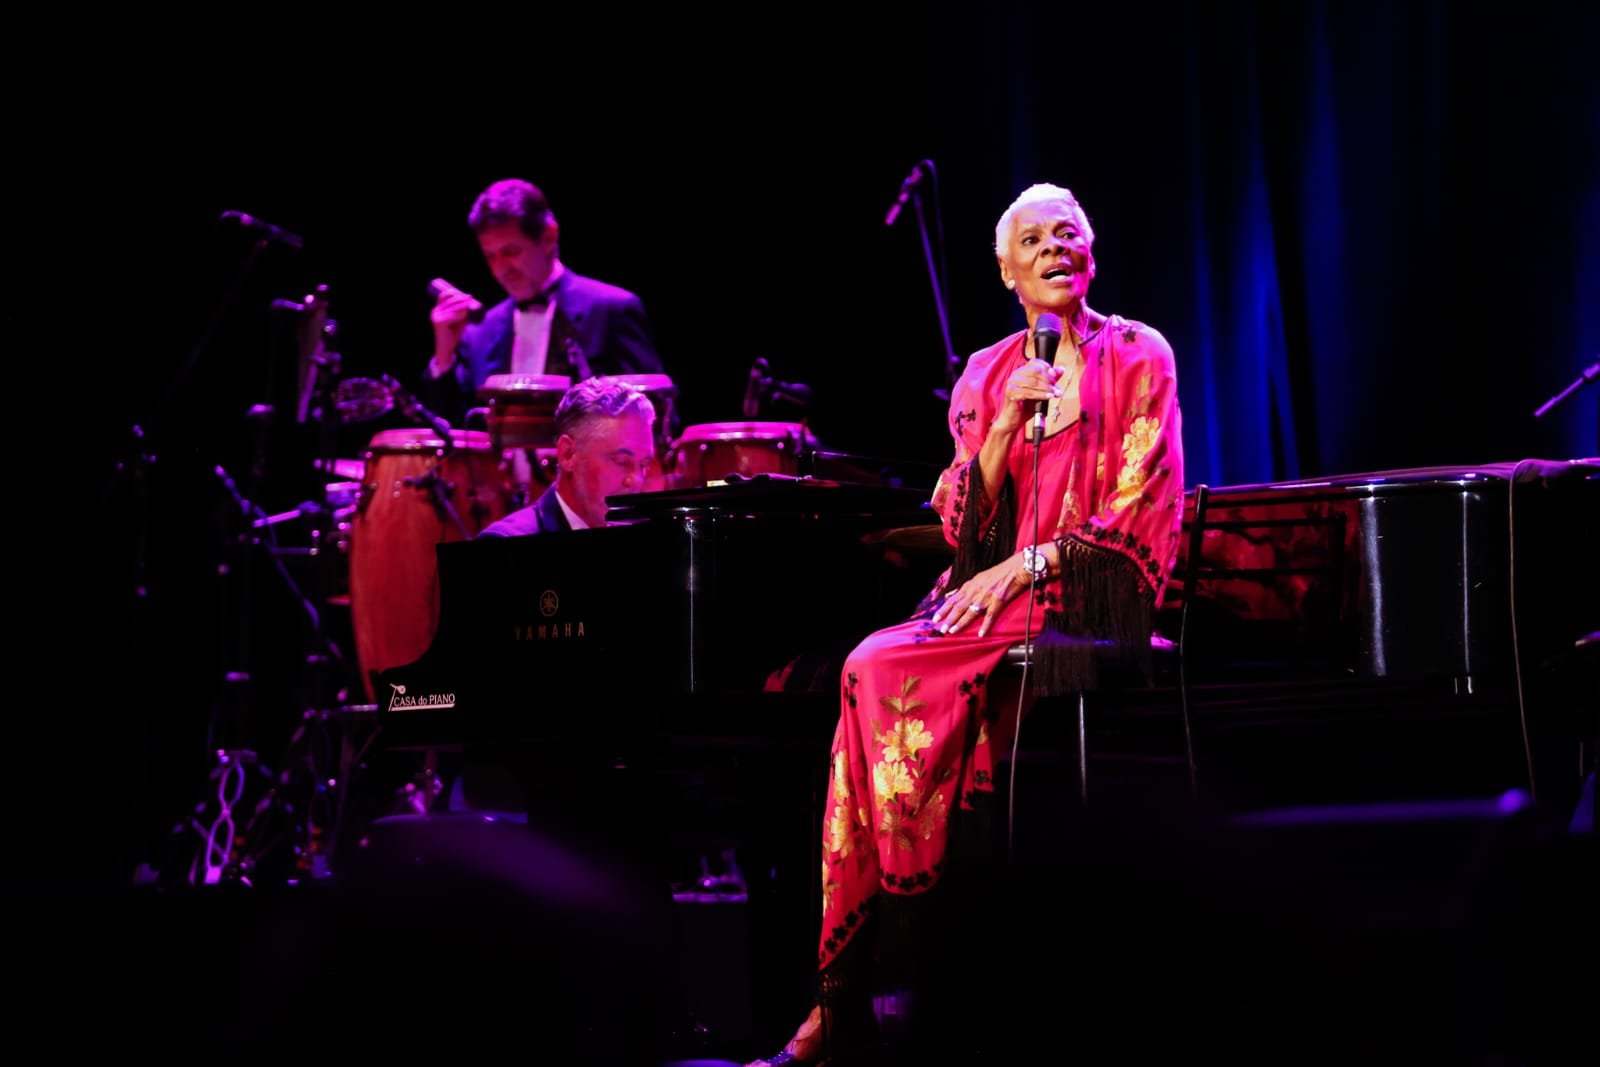 5 unforgettable moments from Dionne Warwick’s performance at Metropoles Music